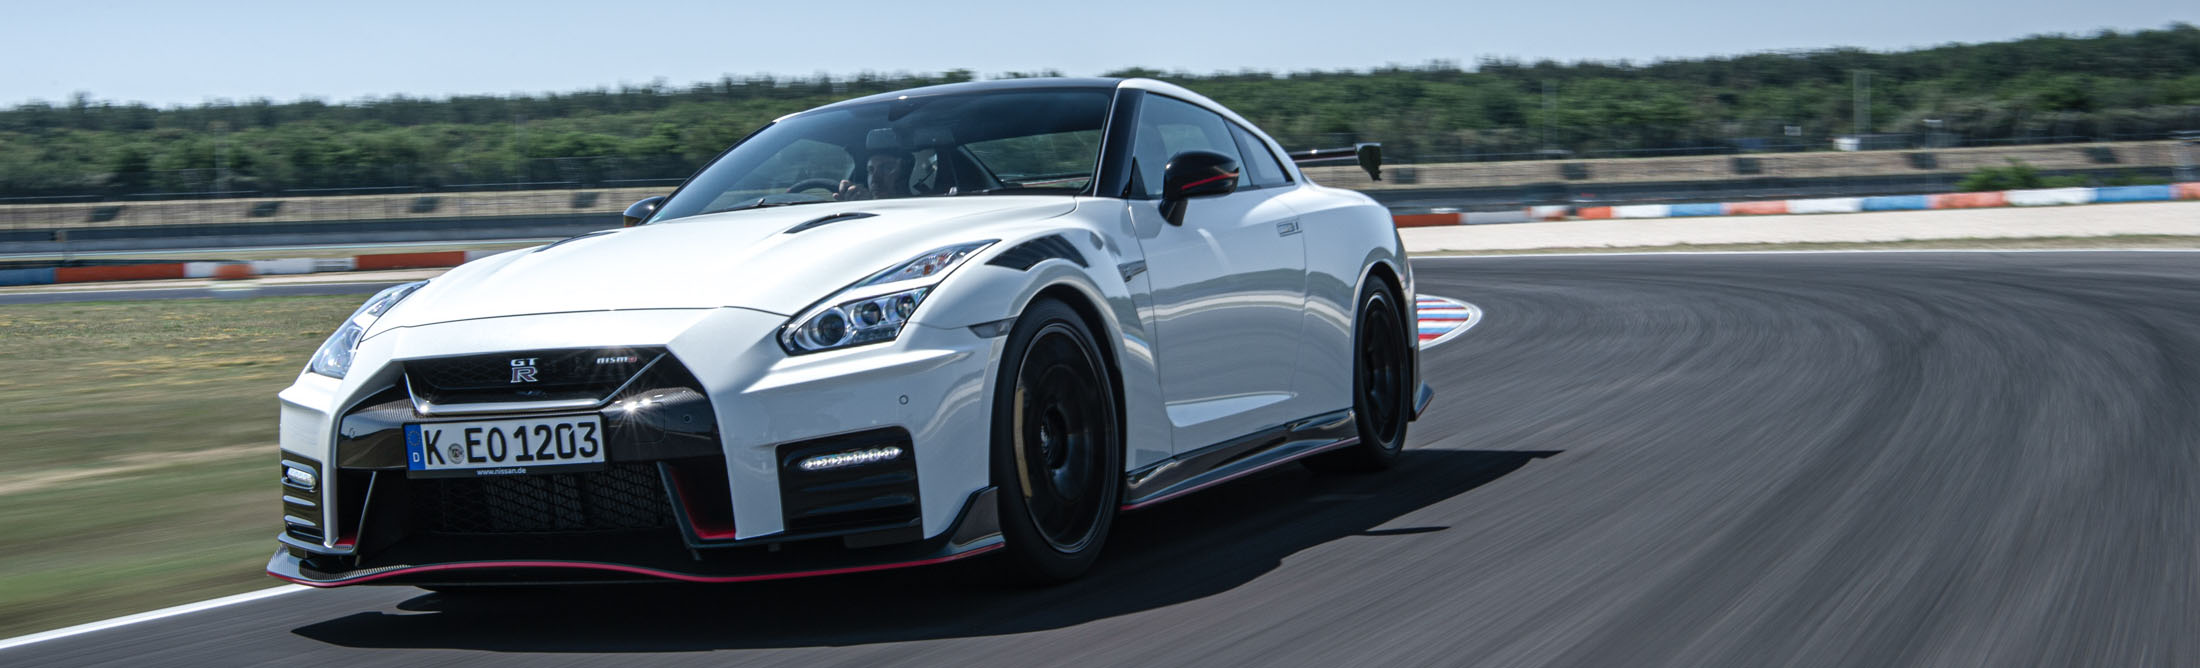 Nissan Gt R Nismo Edition Review Not Worth 212 000 Bloomberg